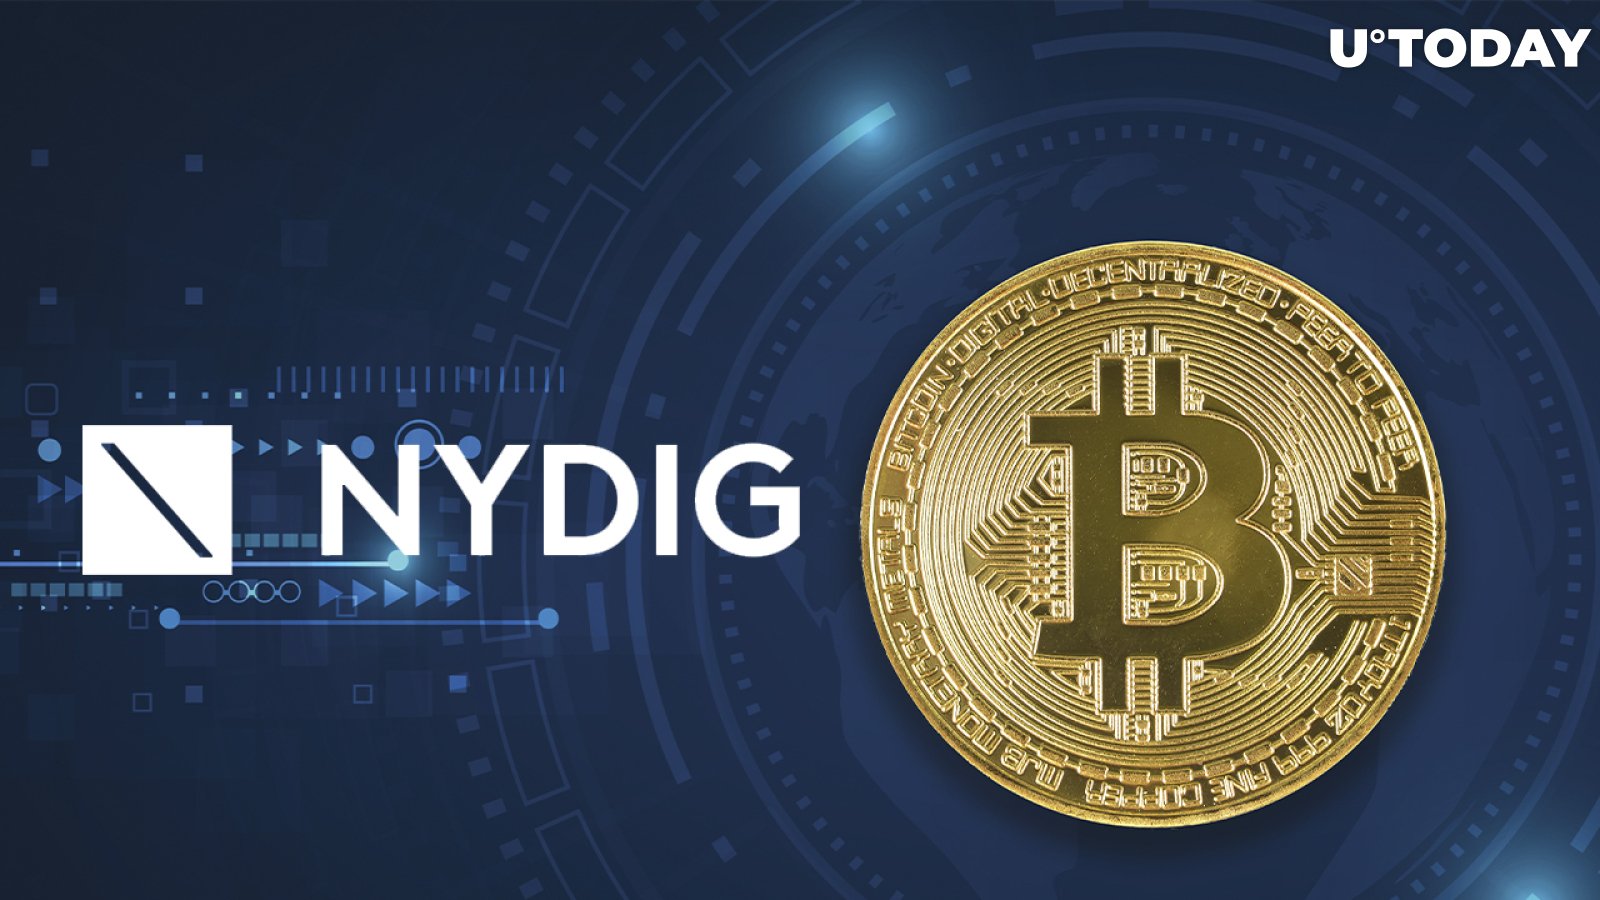 NYDIG Raises $1 Billion to Accelerate Bitcoin Products for Businesses